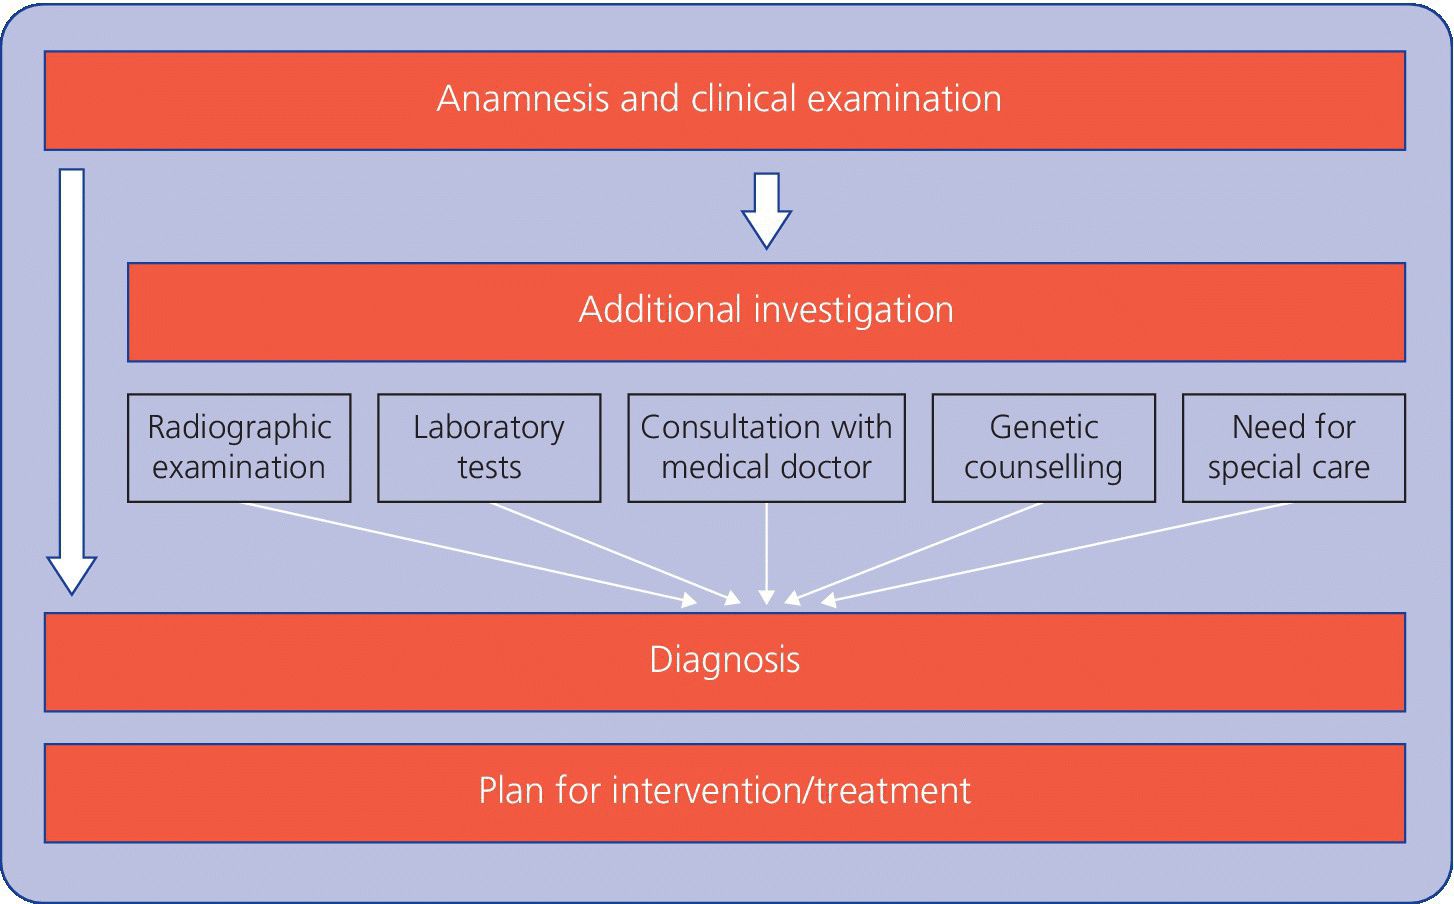 Flowchart illustrating the full procedure of anamnesis, clinical examination, and suggestions for additional tests and information.